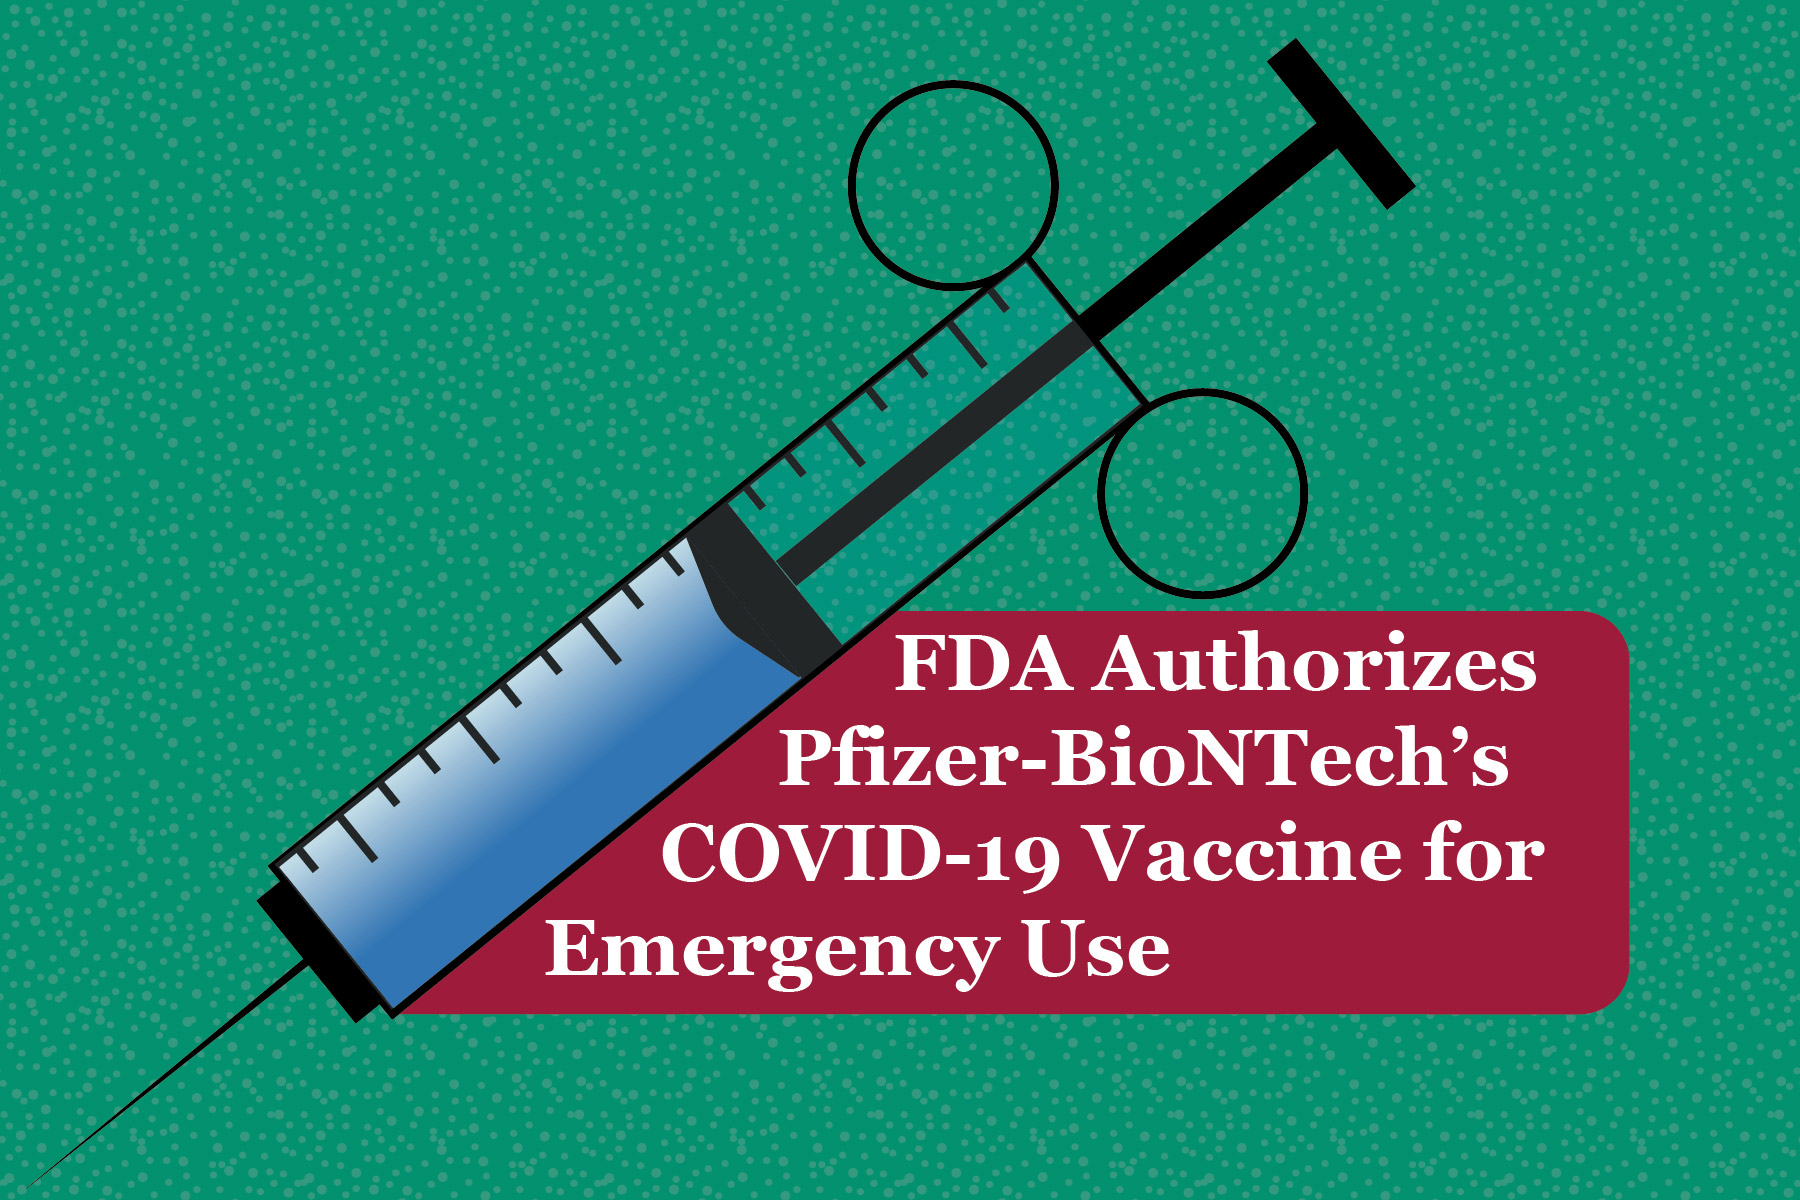 FDA Authorizes Pfizer-BioNTech’s COVID-19 Vaccine for Emergency Use